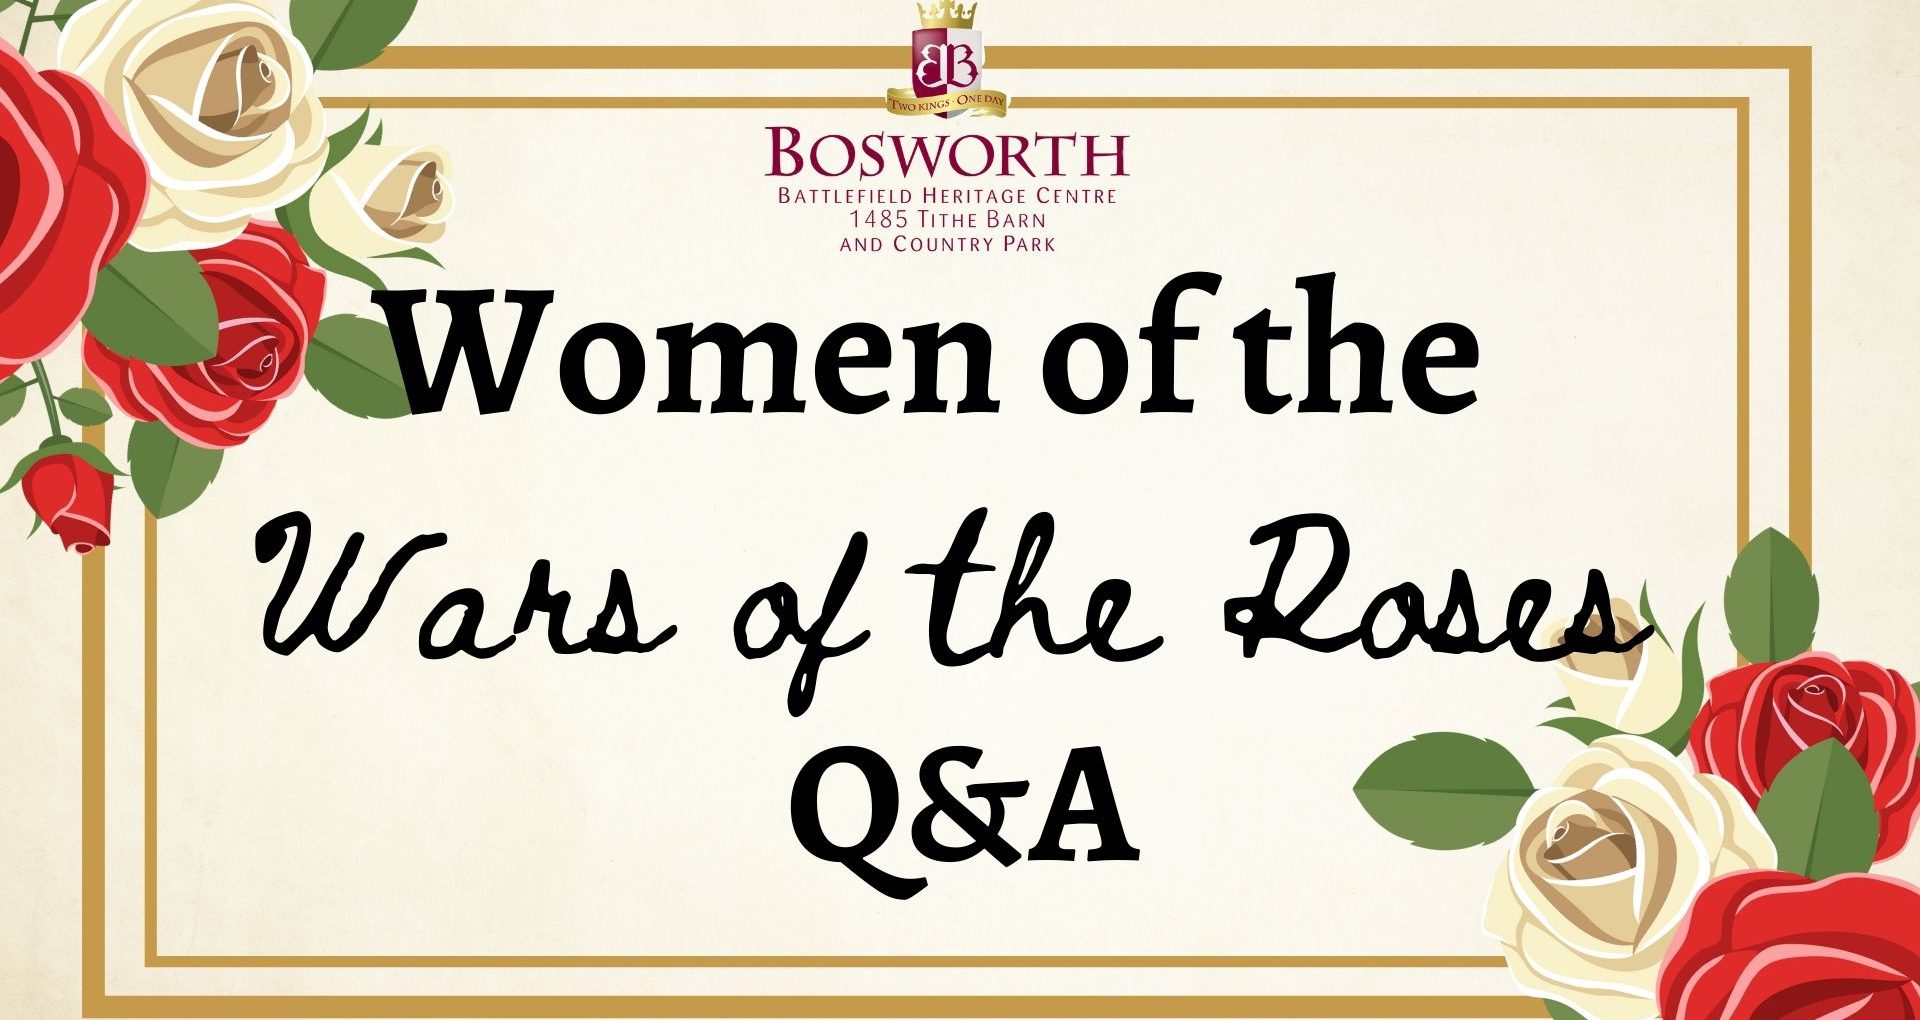 Medieval Medley -Women of The Wars of the Roses Online Q&A